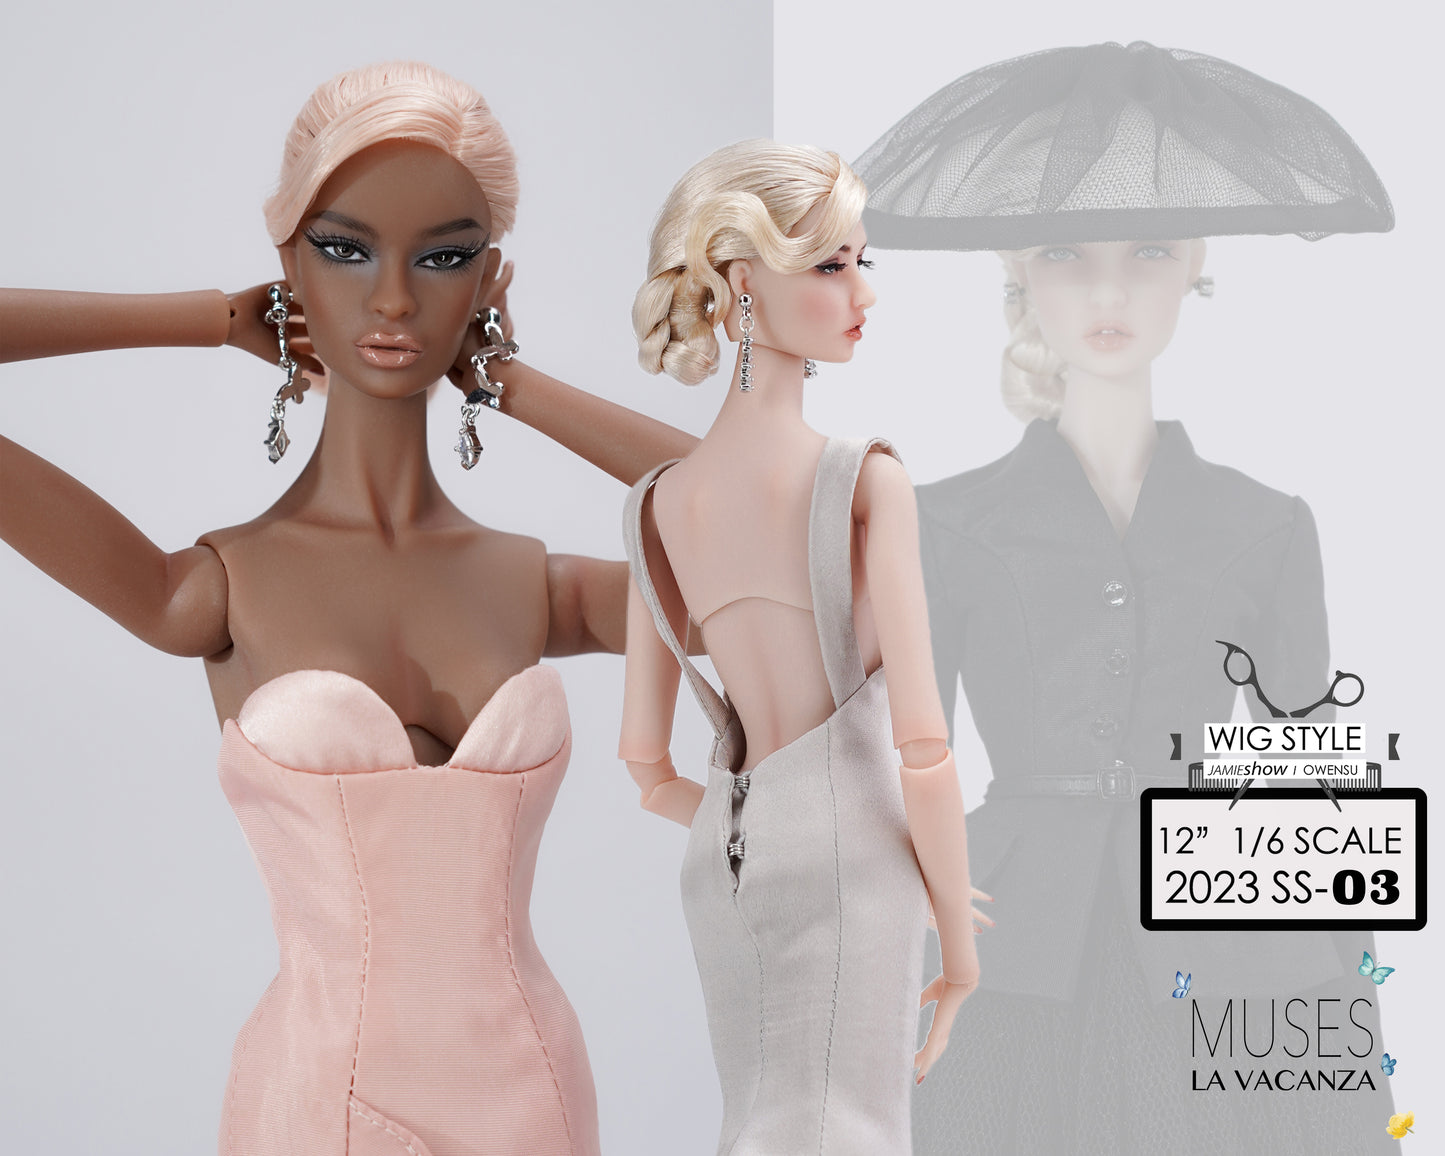 Muses La Vacanza Wig Style 3, Pre-Oder for Winter 2023 Delivery.